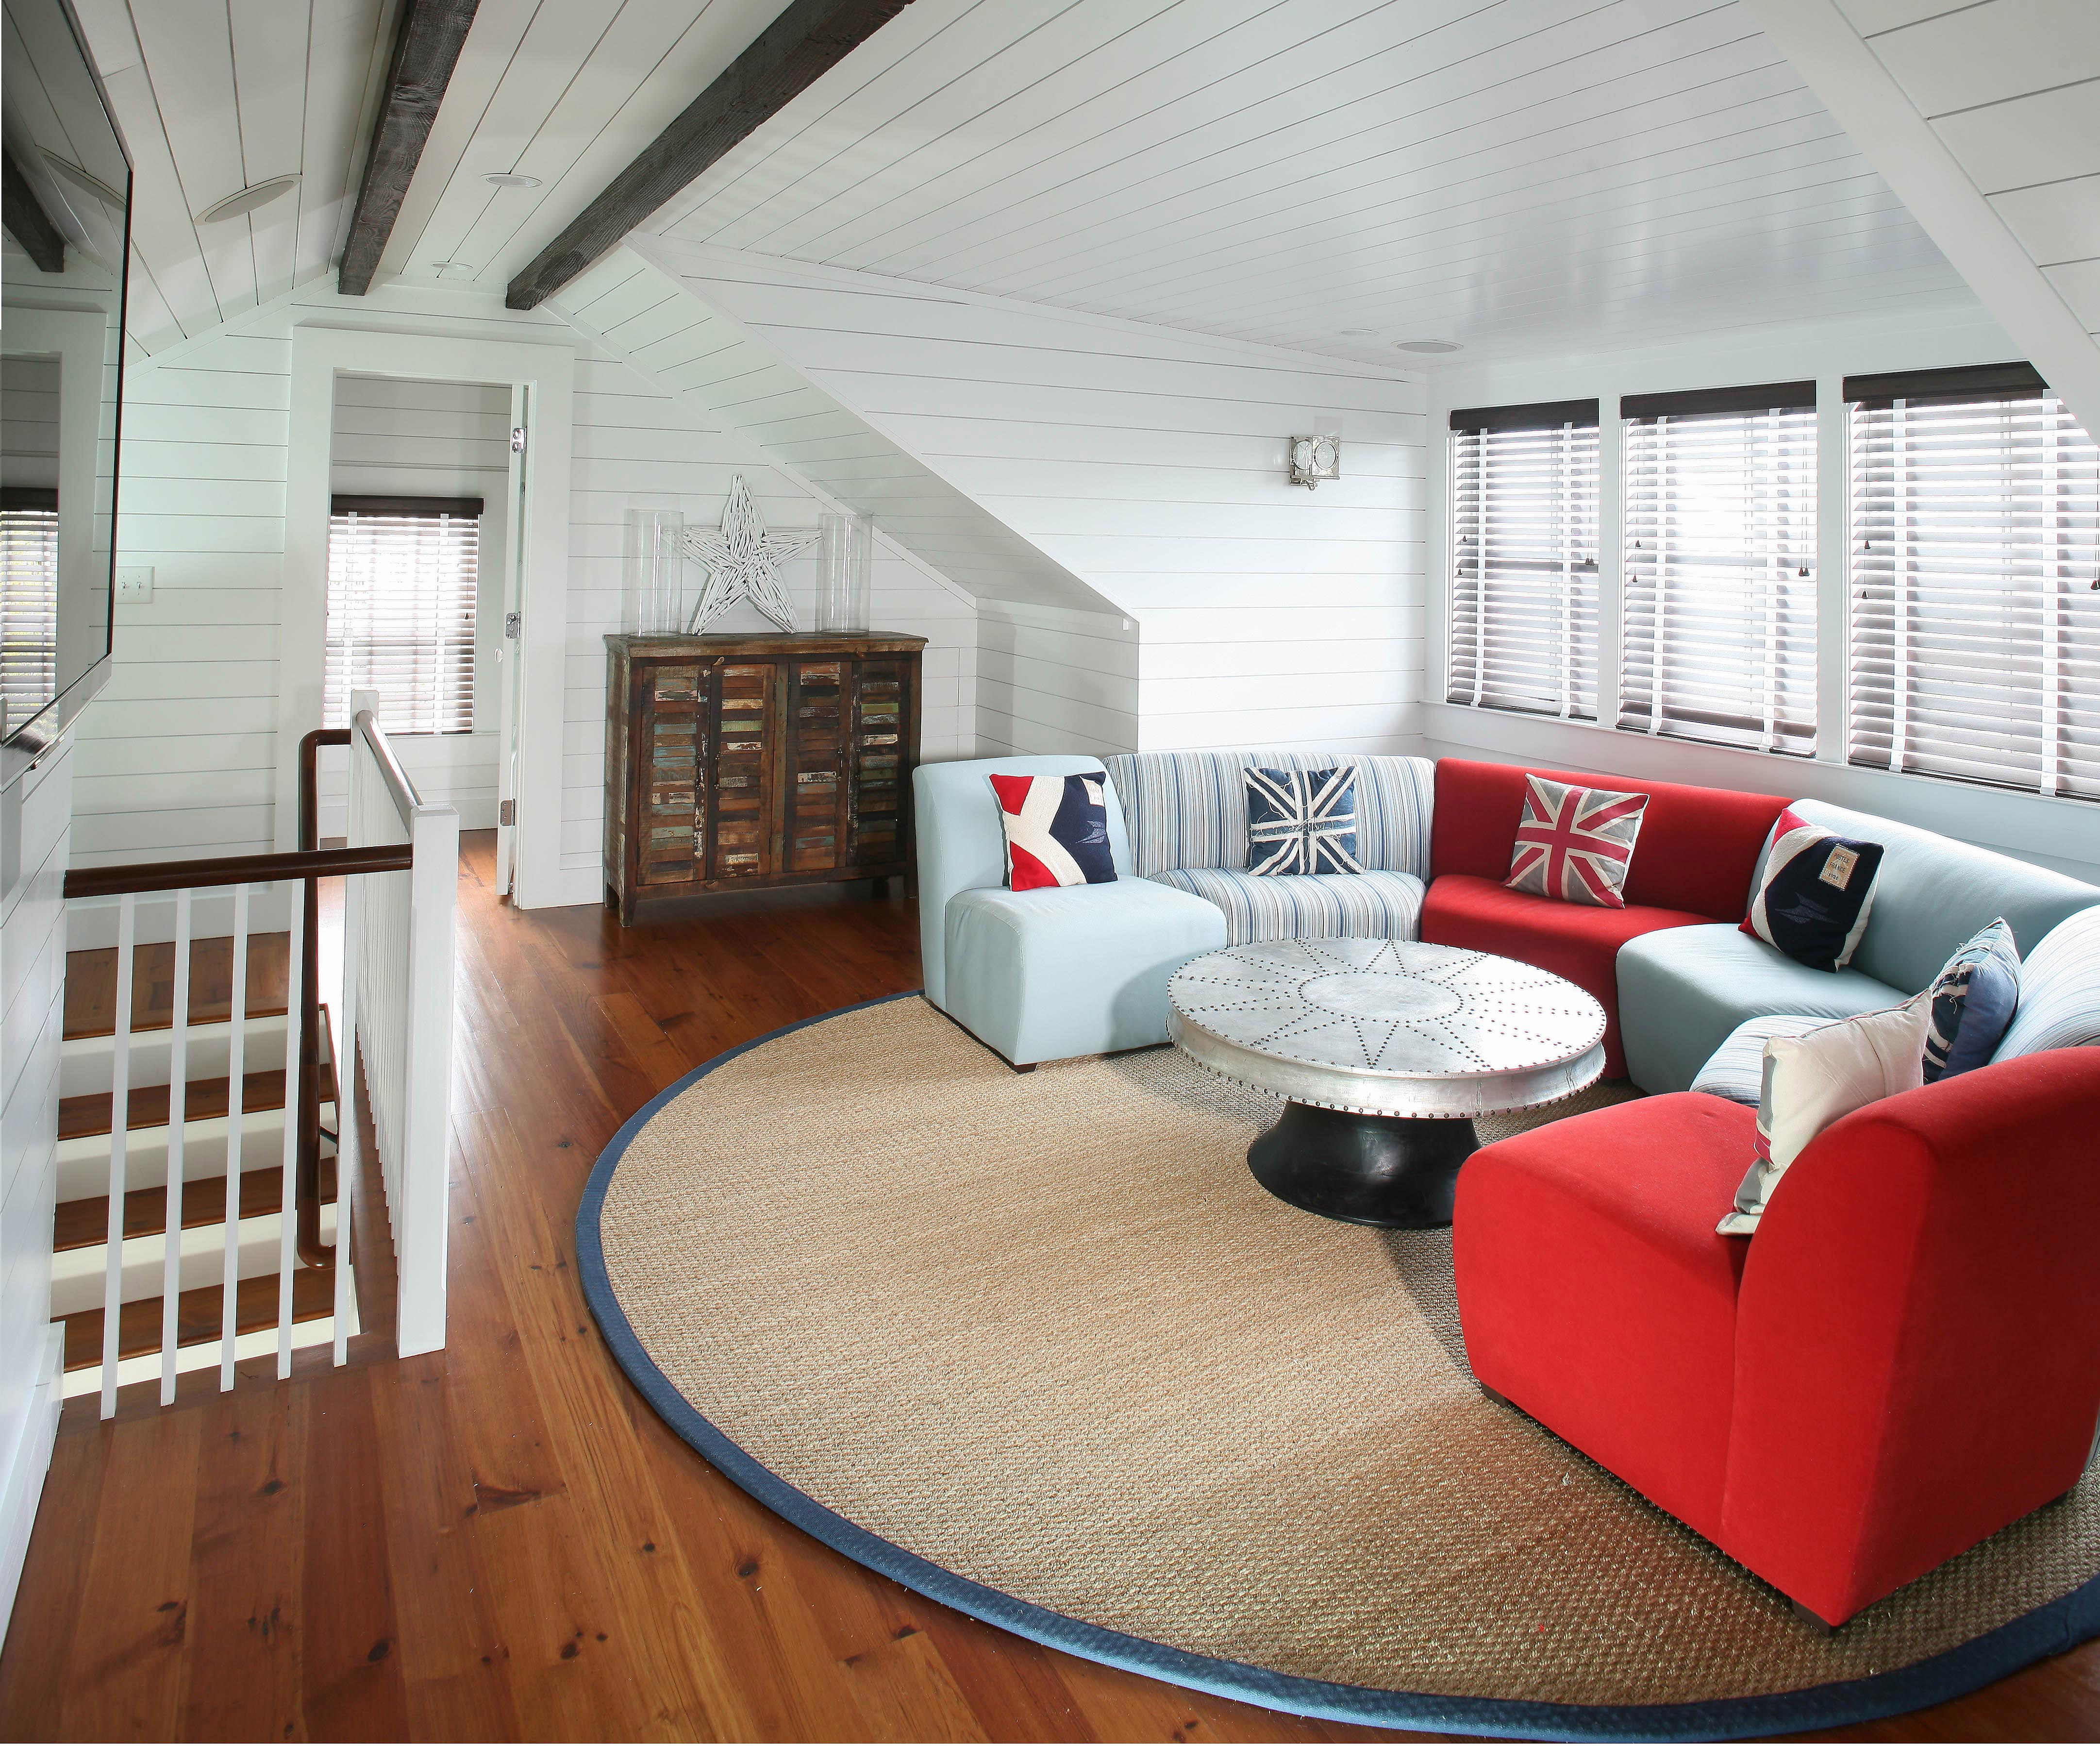 We turned an unfinished attic into an airy living room as part of this Sullivan's Island renovation project.